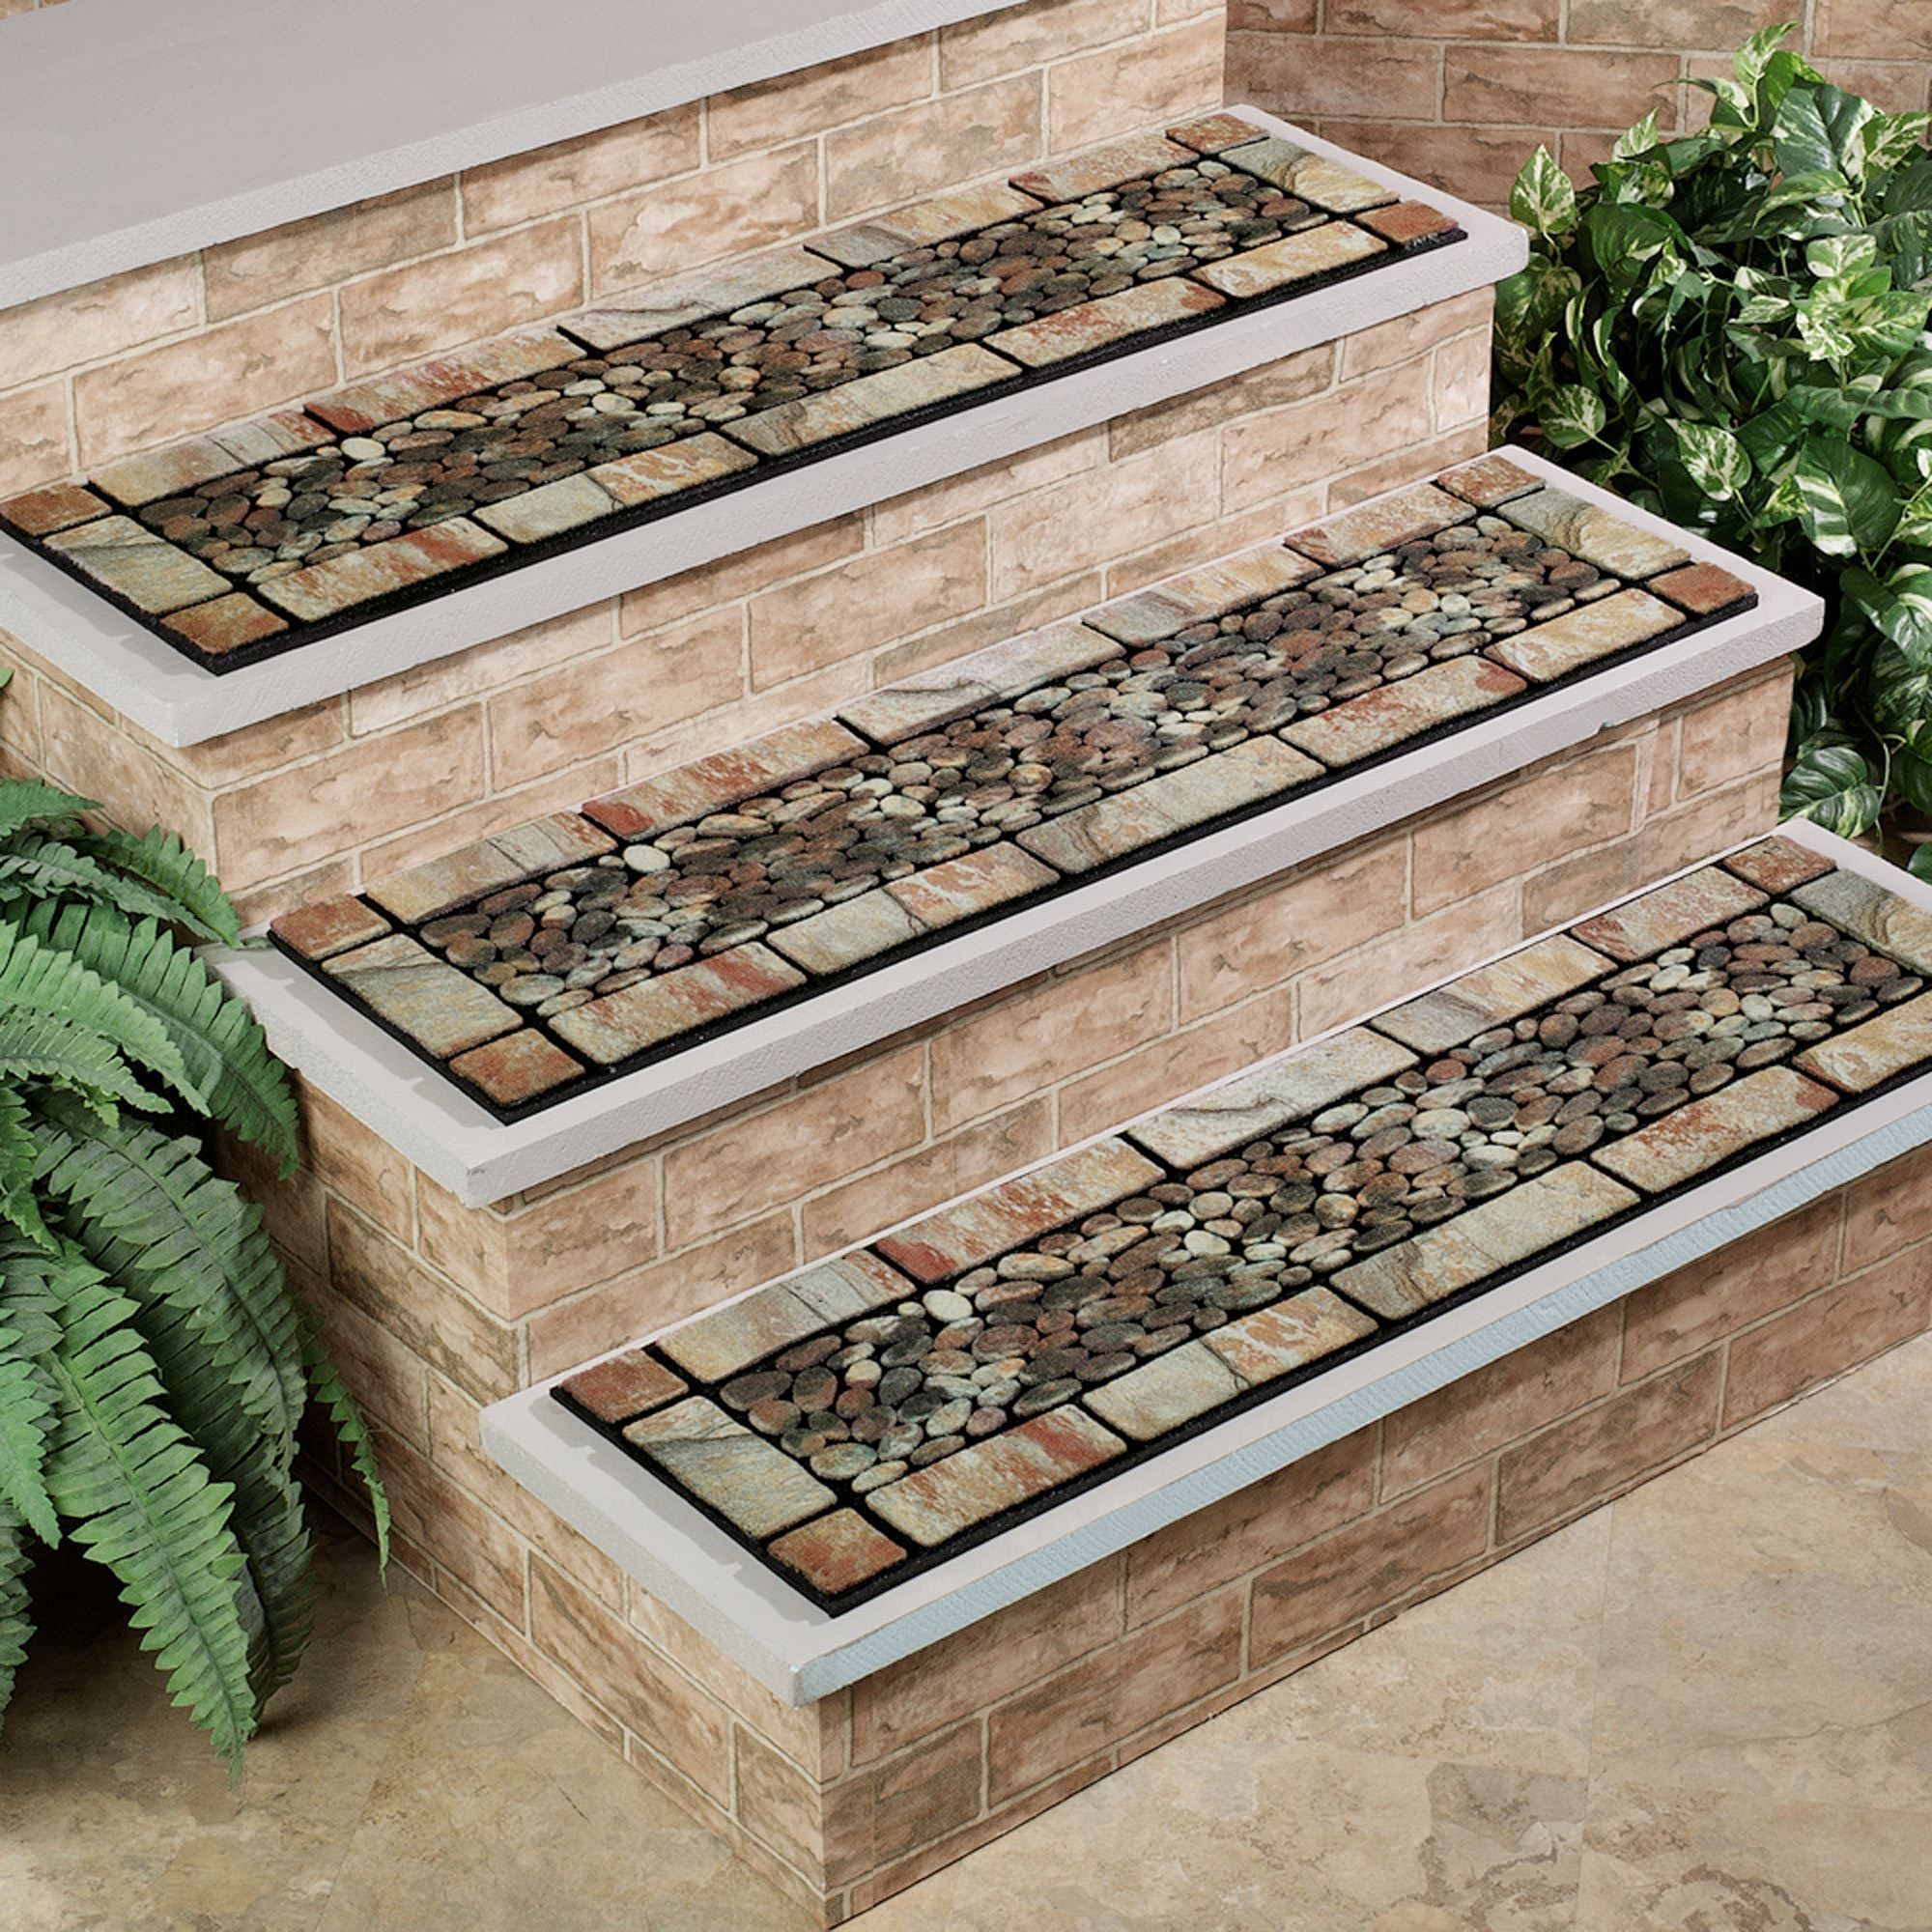 Outdoor Doormats And Stair Treads Touch Of Class With Stair Tread Rugs Outdoor (View 1 of 15)